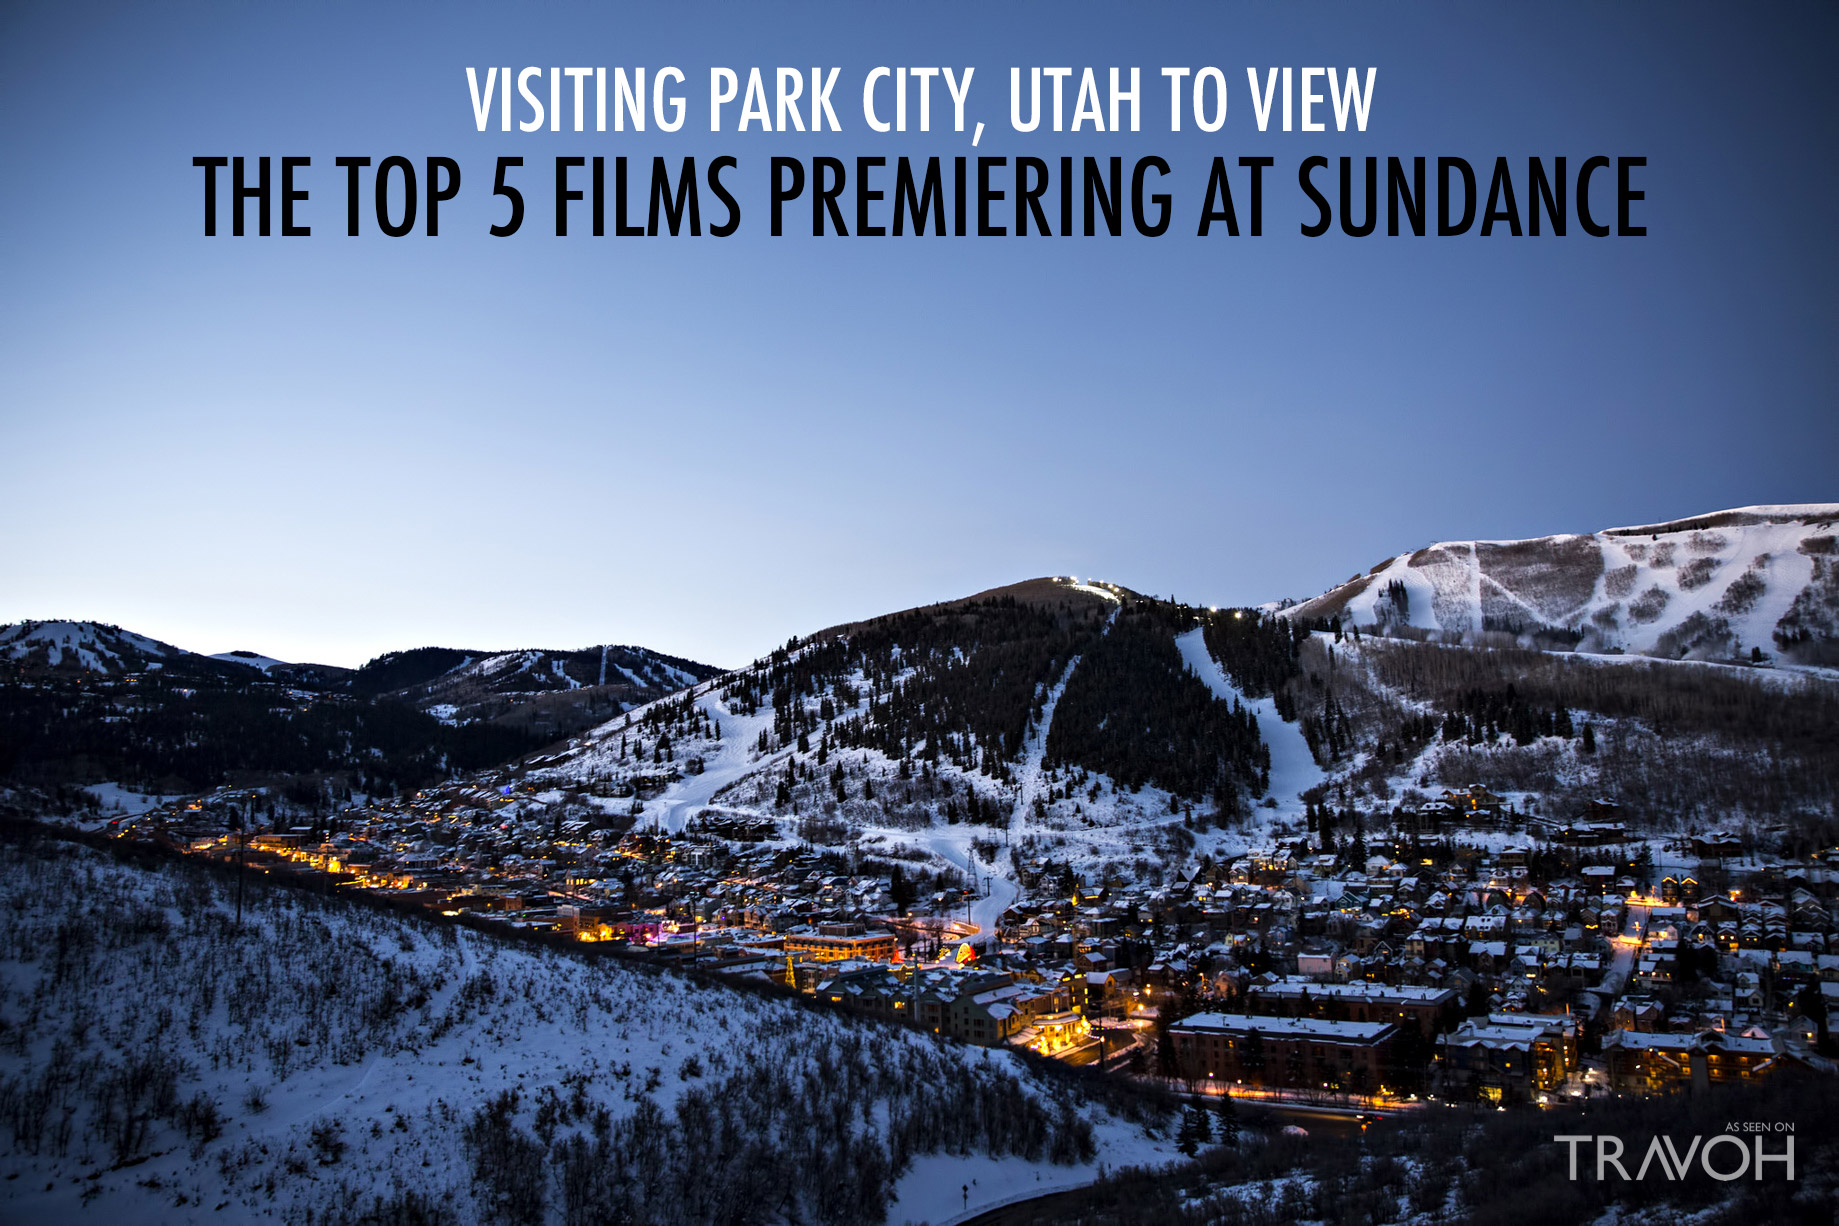 Visiting Park City, Utah to View the Top 5 Films Premiering at Sundance 2018